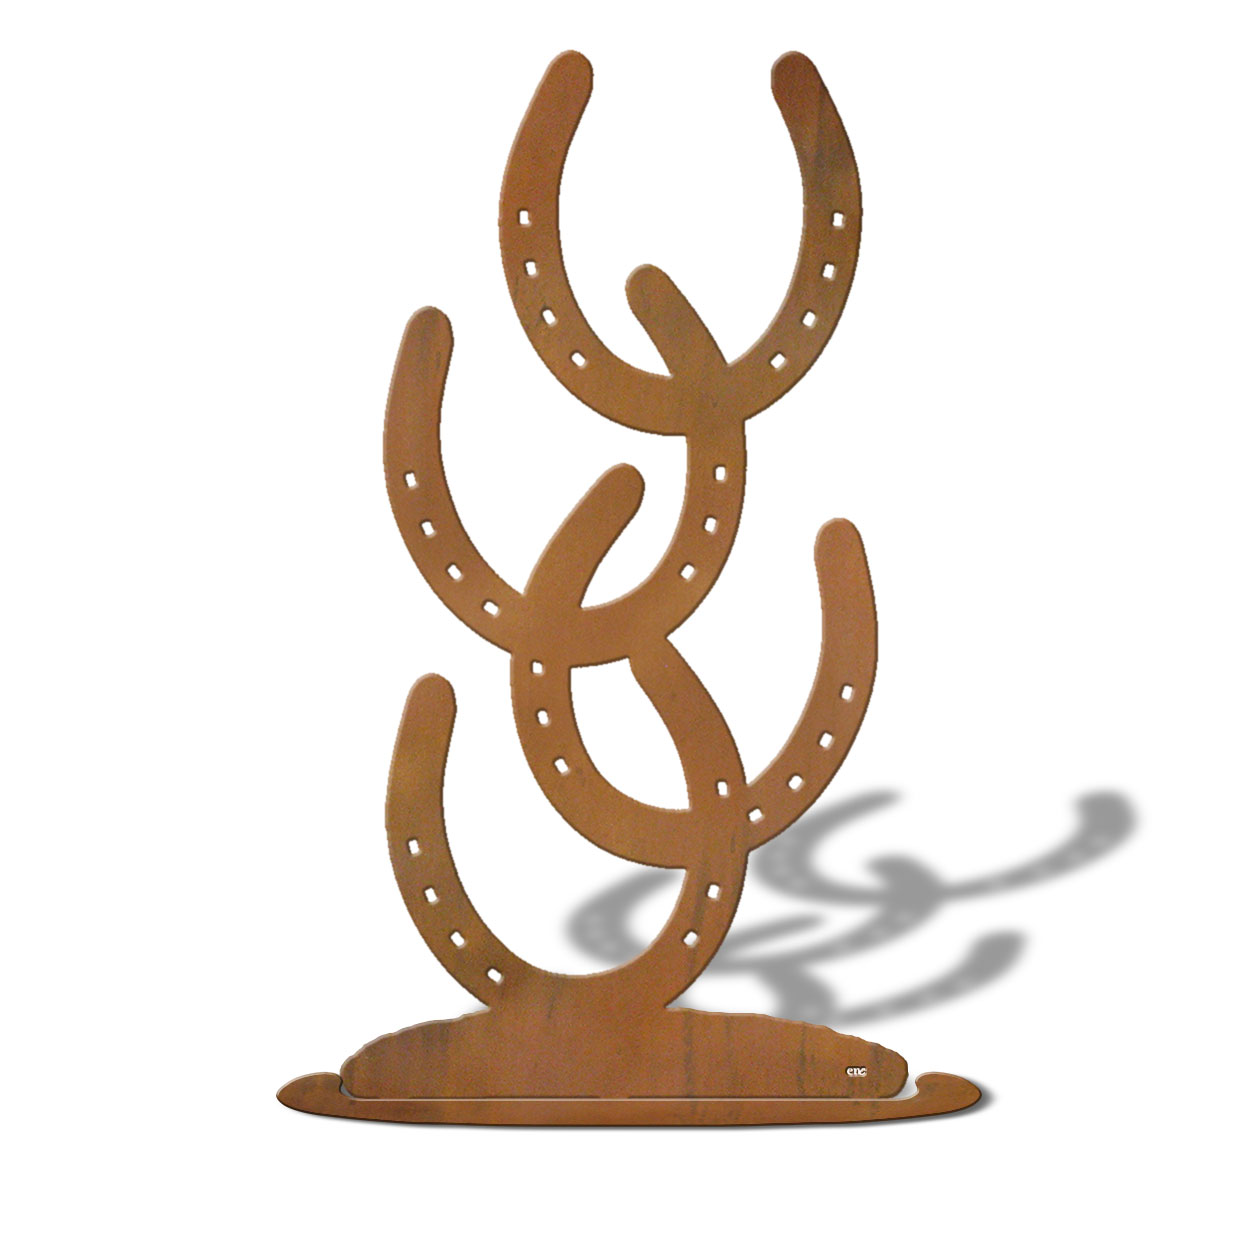 623411r - Tabletop Art - 10in x 18in - Horseshoes - Rust Patina